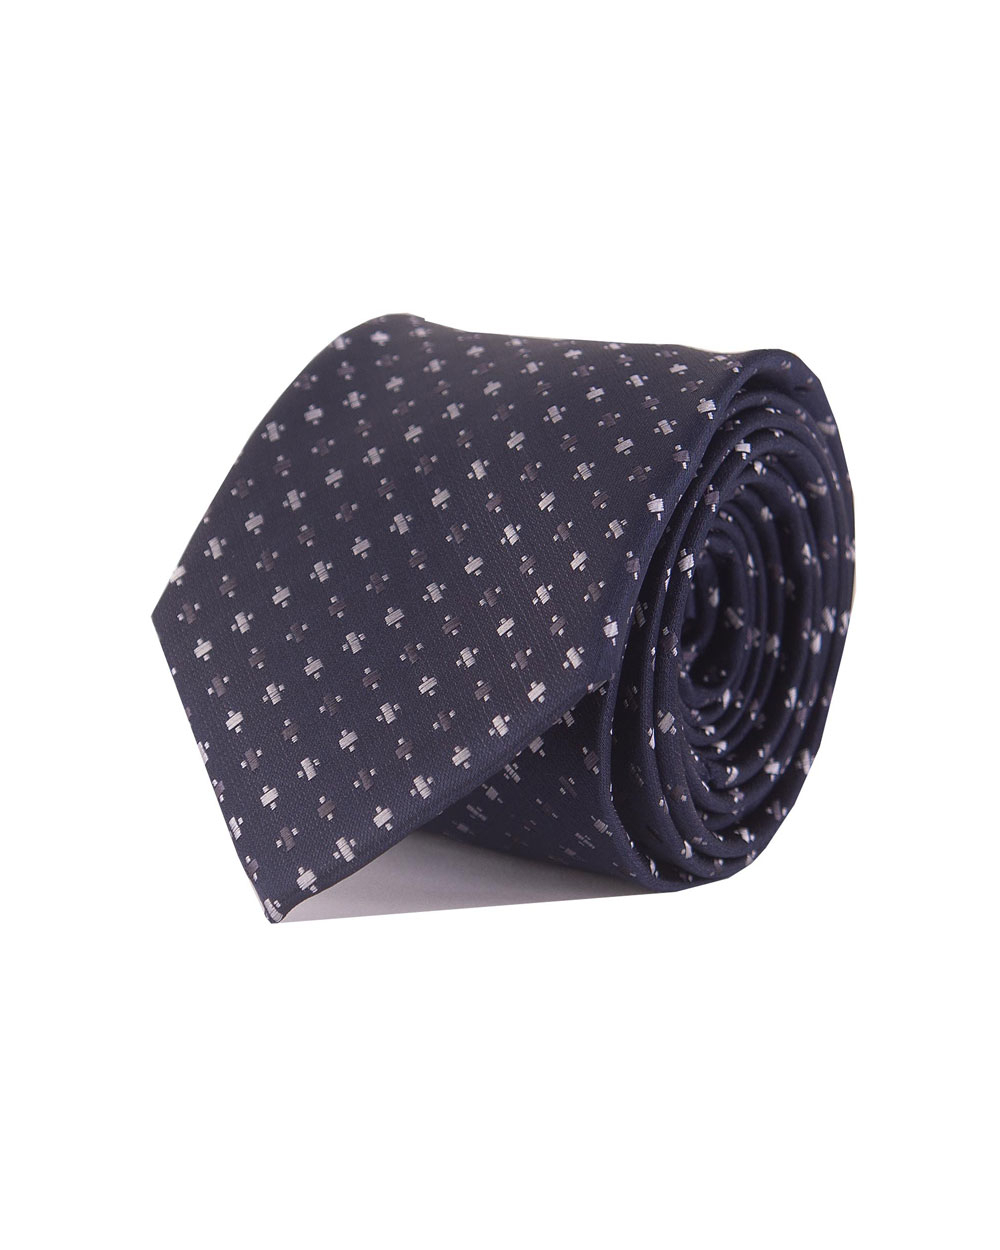 Double Two Extra Long Patterned Tie (navy/grey)